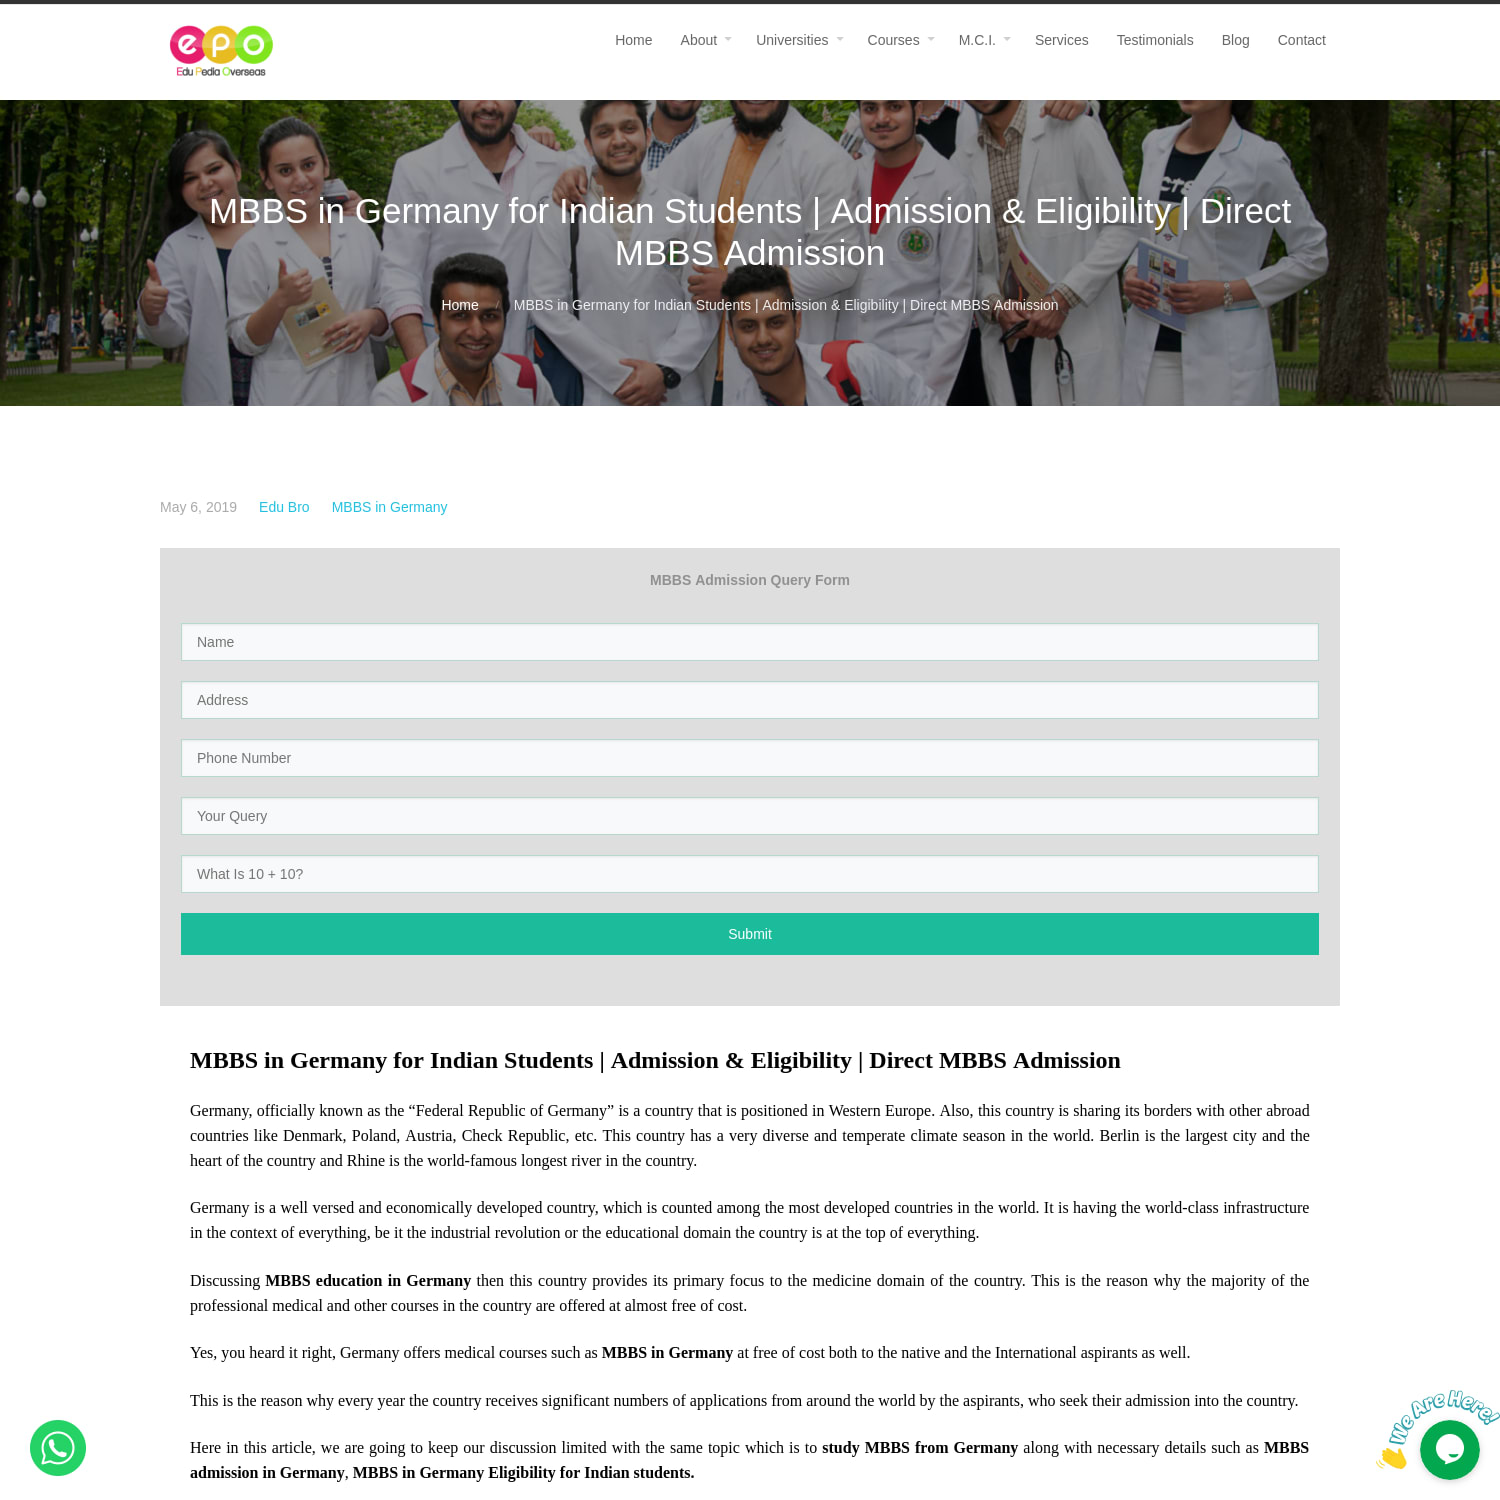 MBBS in Germany for Indian Students | Direct MBBS Admission |